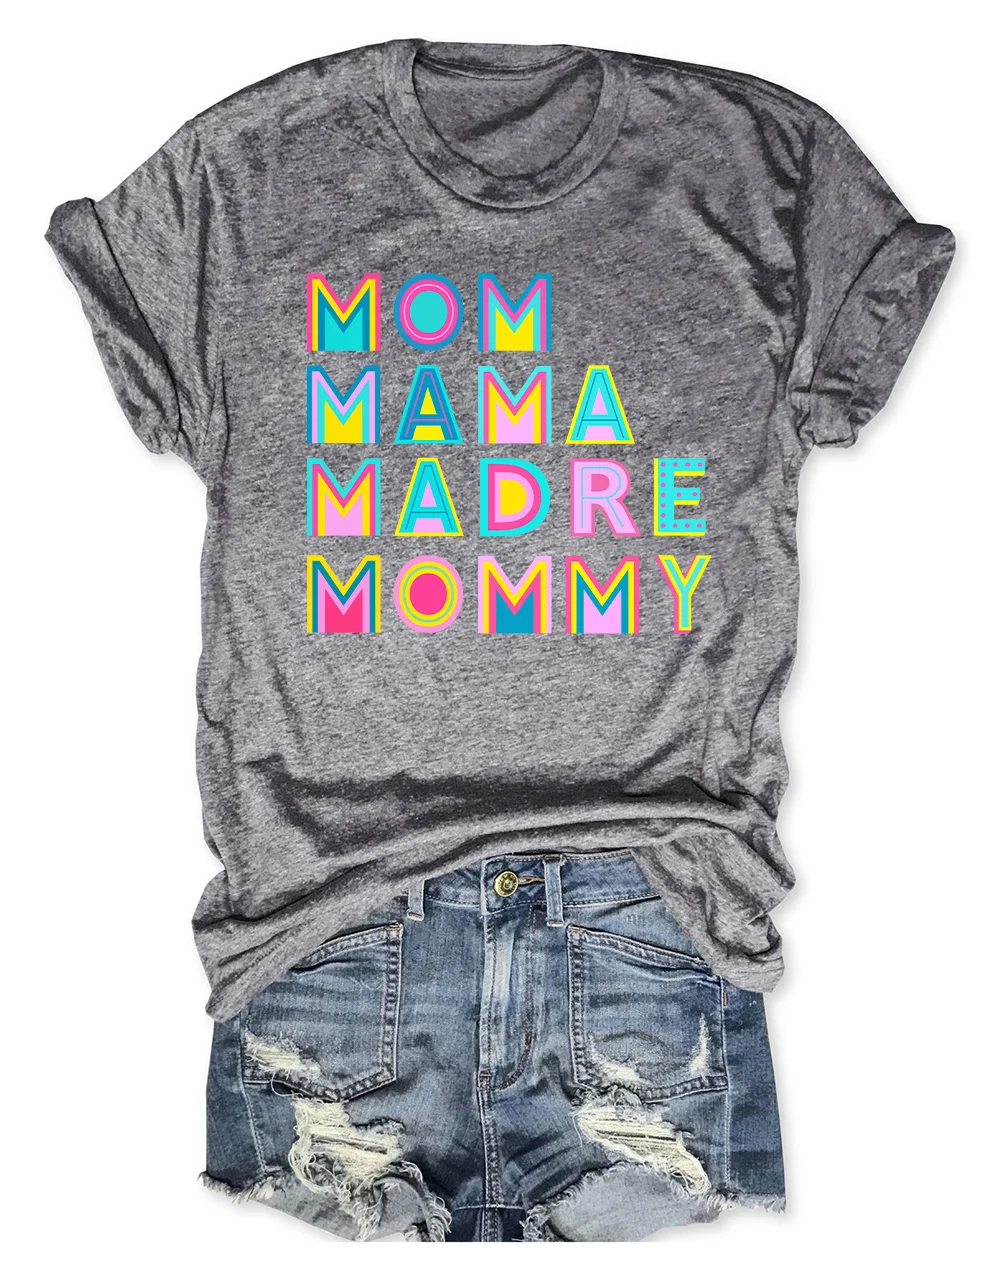 Mom Mama Madre Mommy T-Shirt